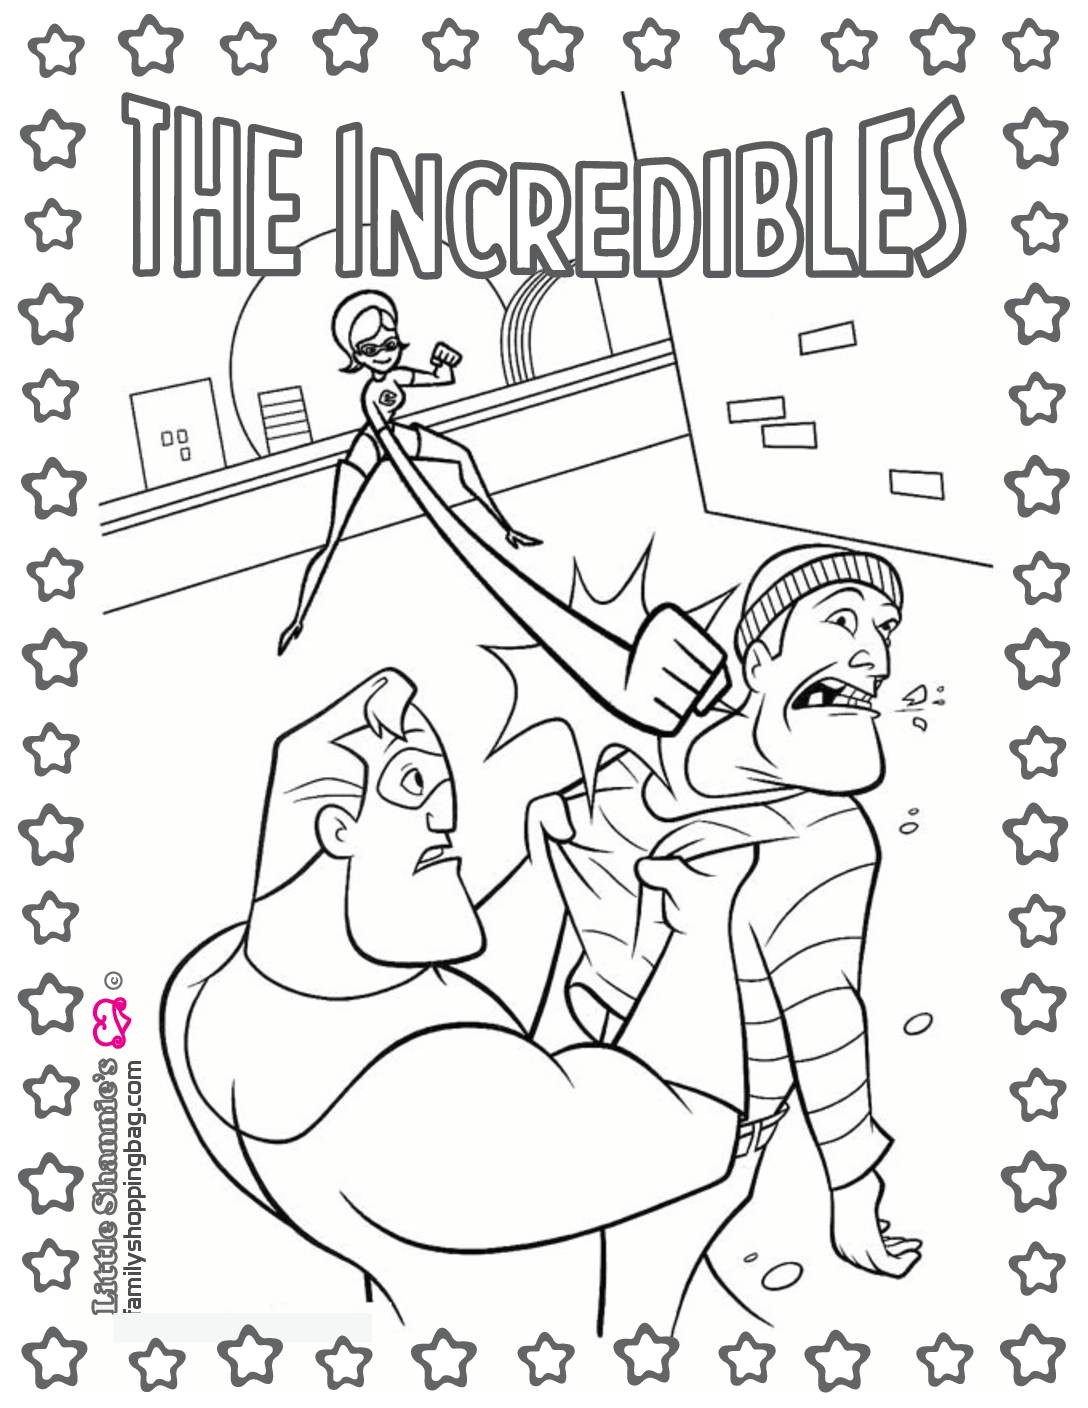 Coloring Page 4 Incredibles